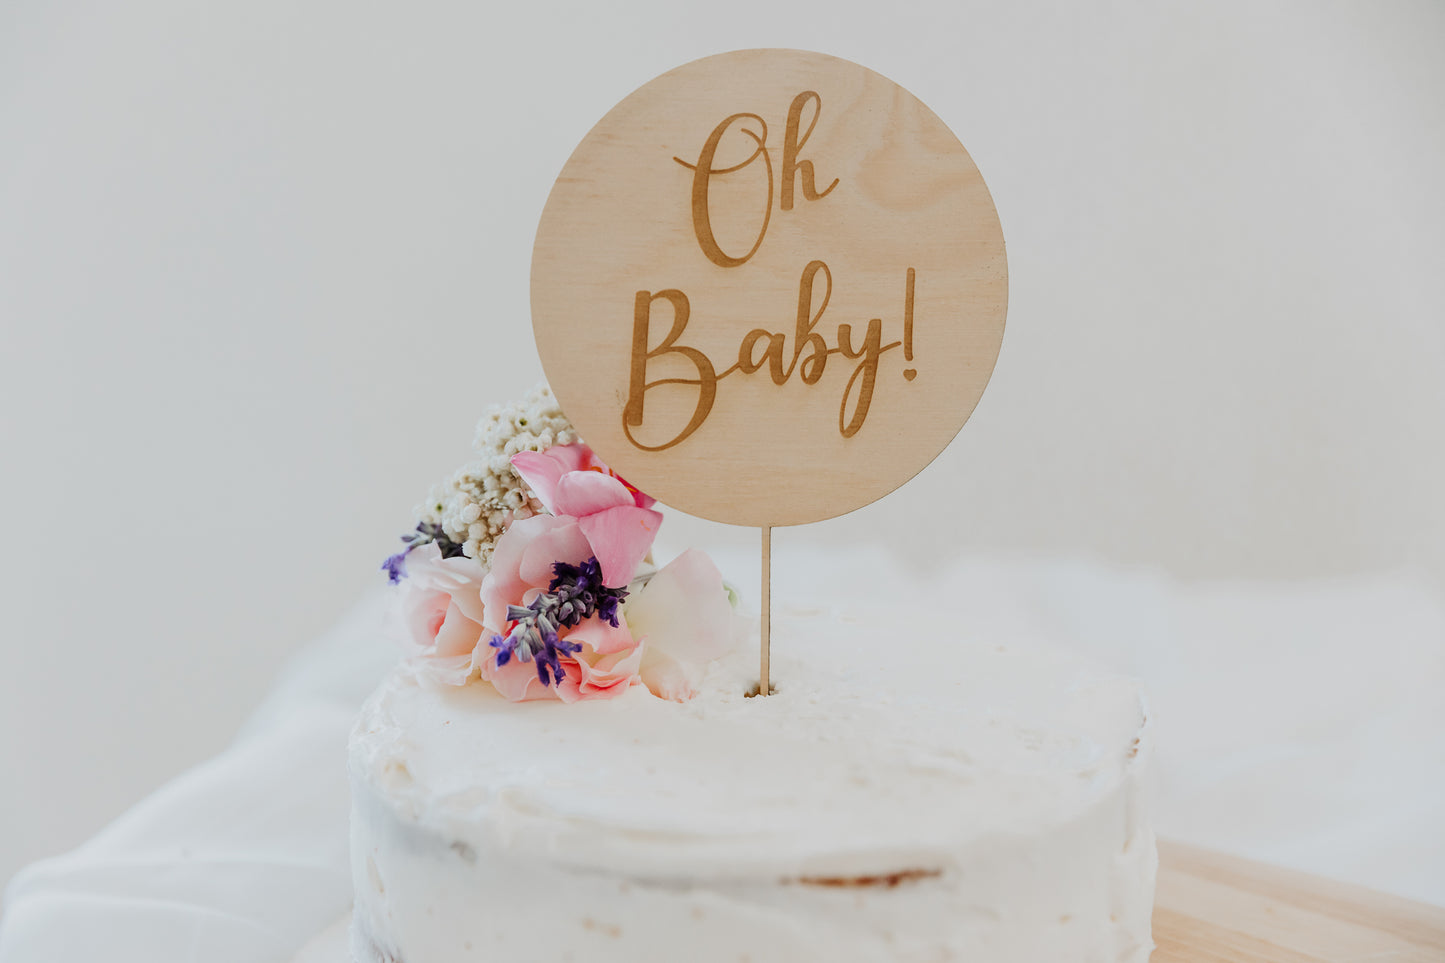 Oh Baby Round Wooden Baby Shower Cake Topper